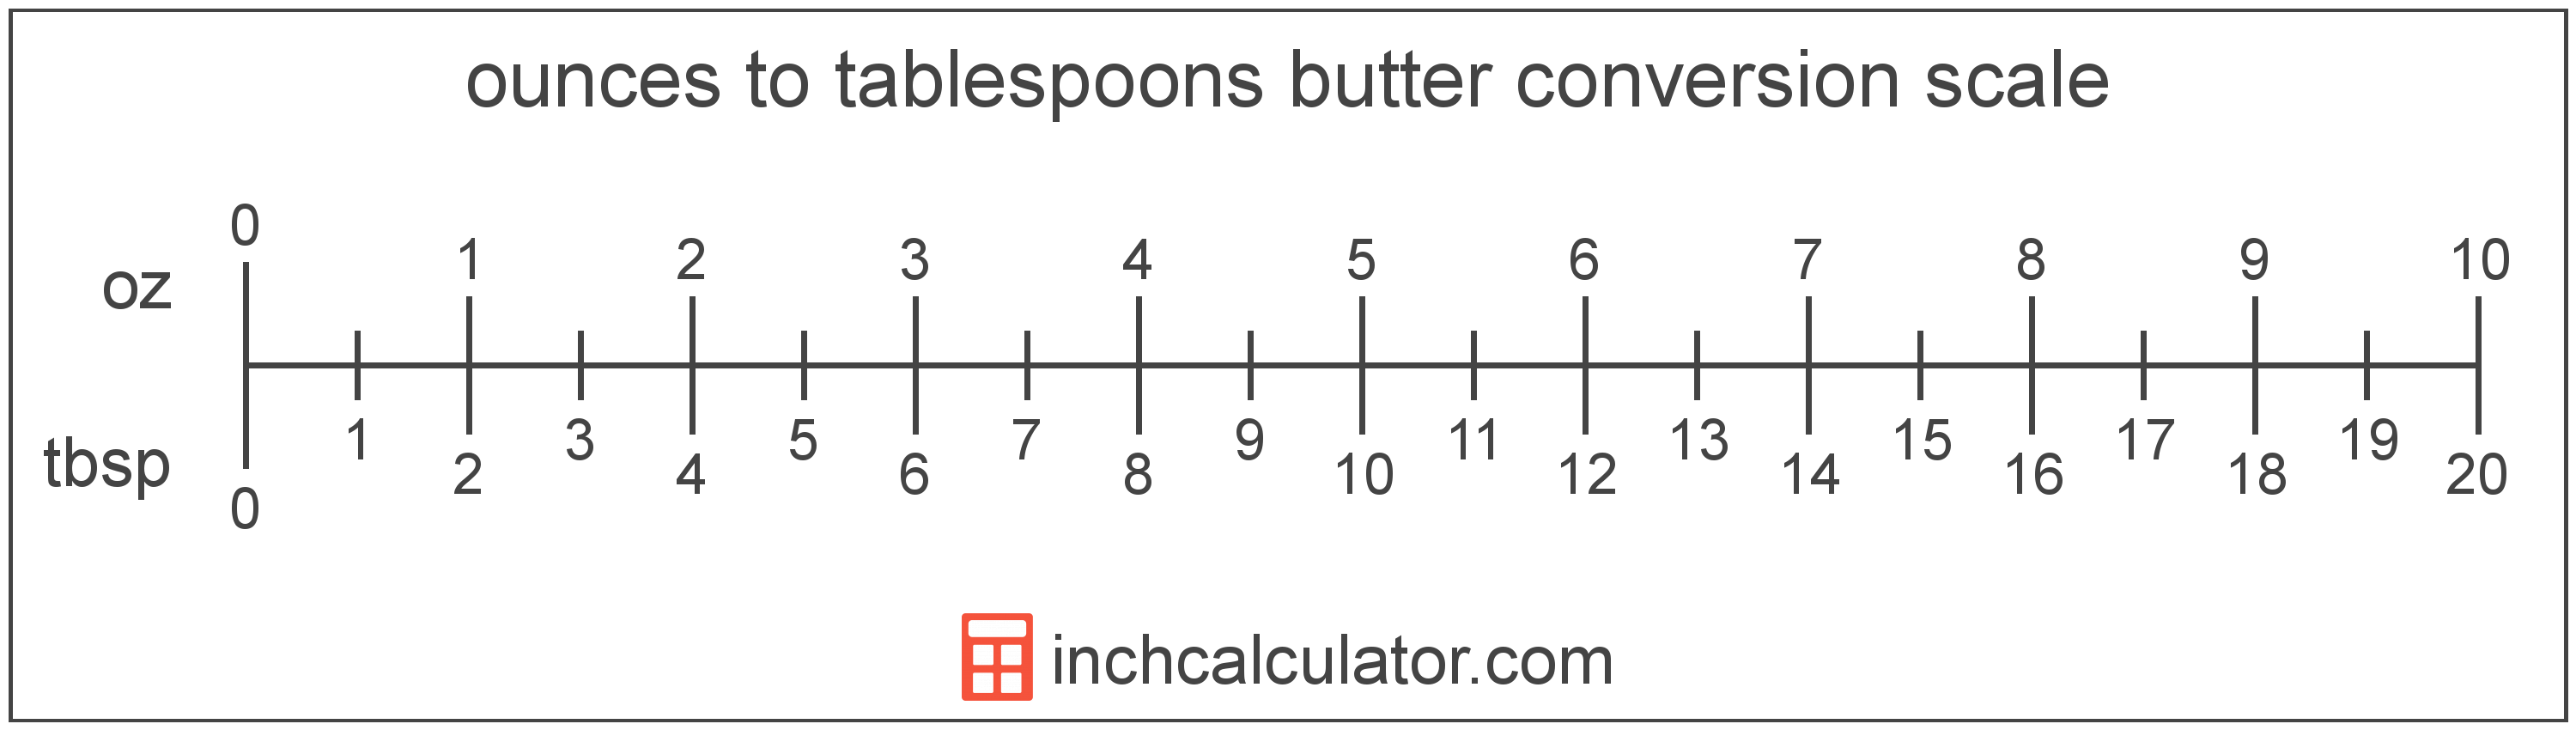 Butter 4 grams tablespoon in